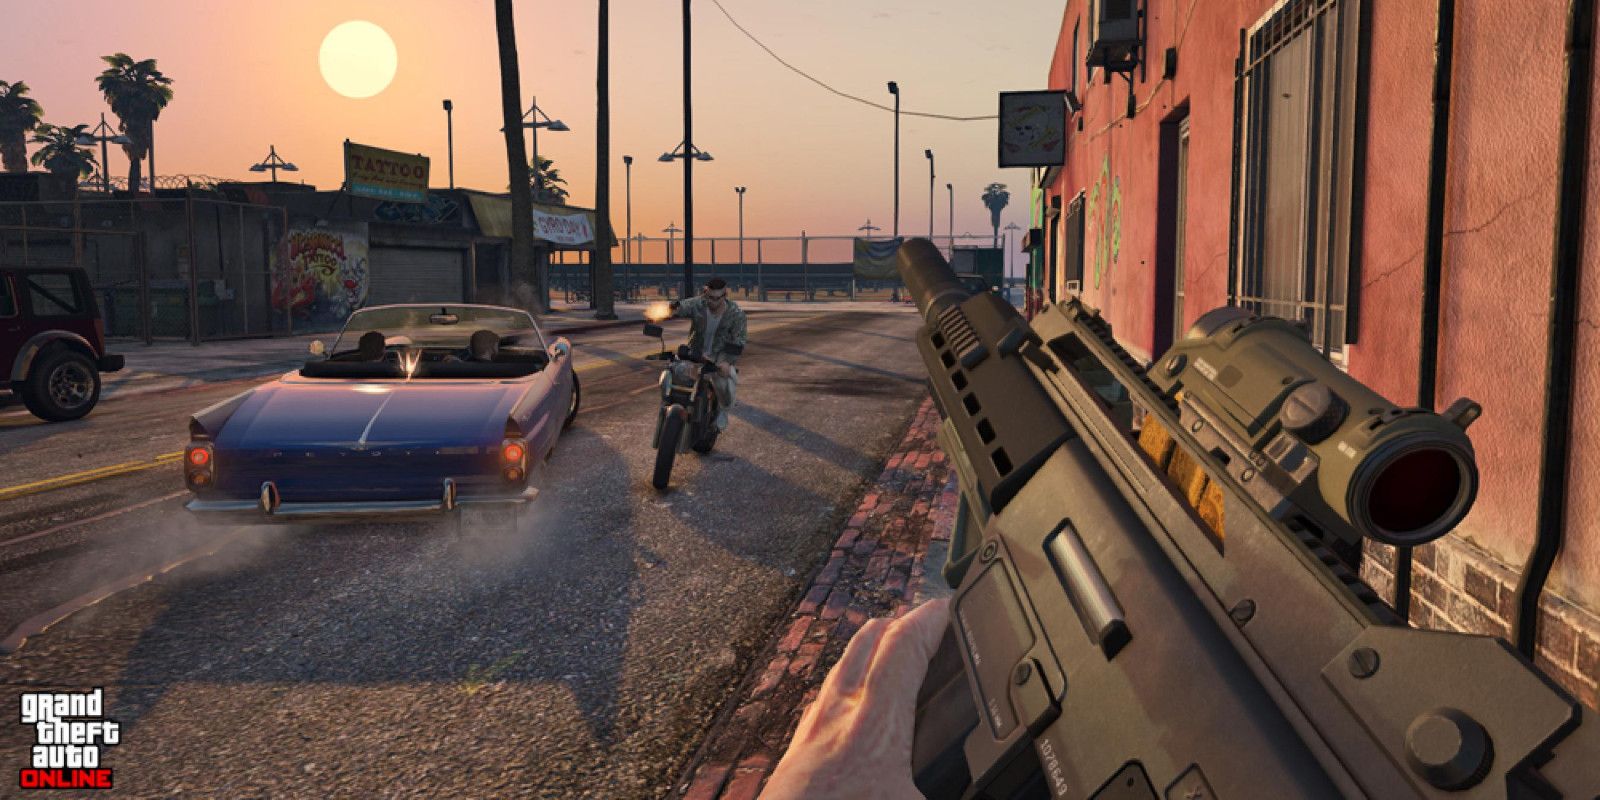 GTA Parent Company Set to Release 93 Games Over the Next 5 Years